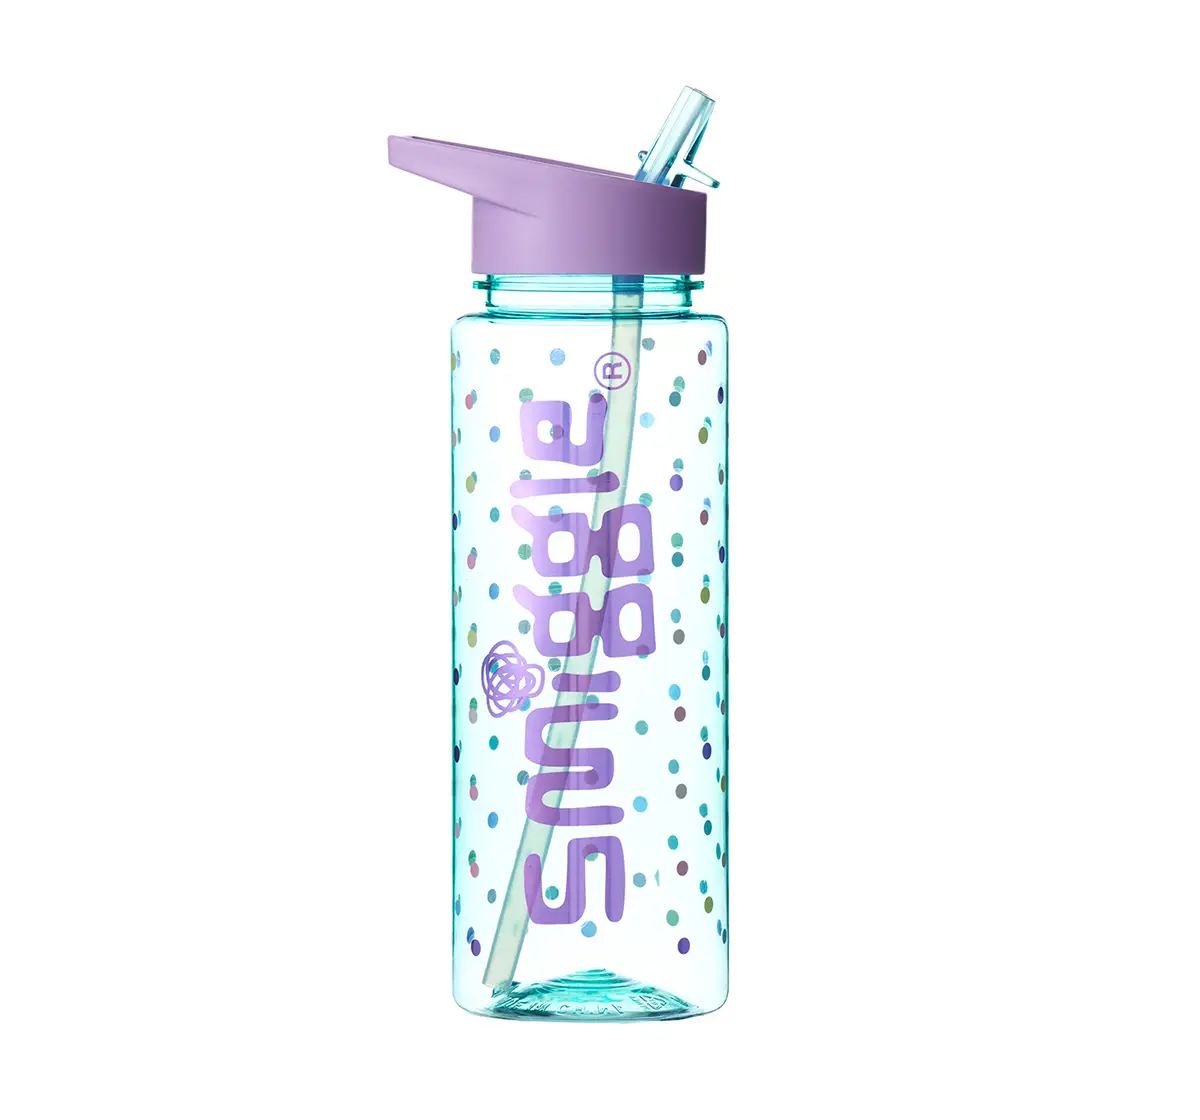 Smiggle Smiggle Block Bottle with Flip Top Spout - Pastel Print Bags for Kids age 3Y+ (Pastel)